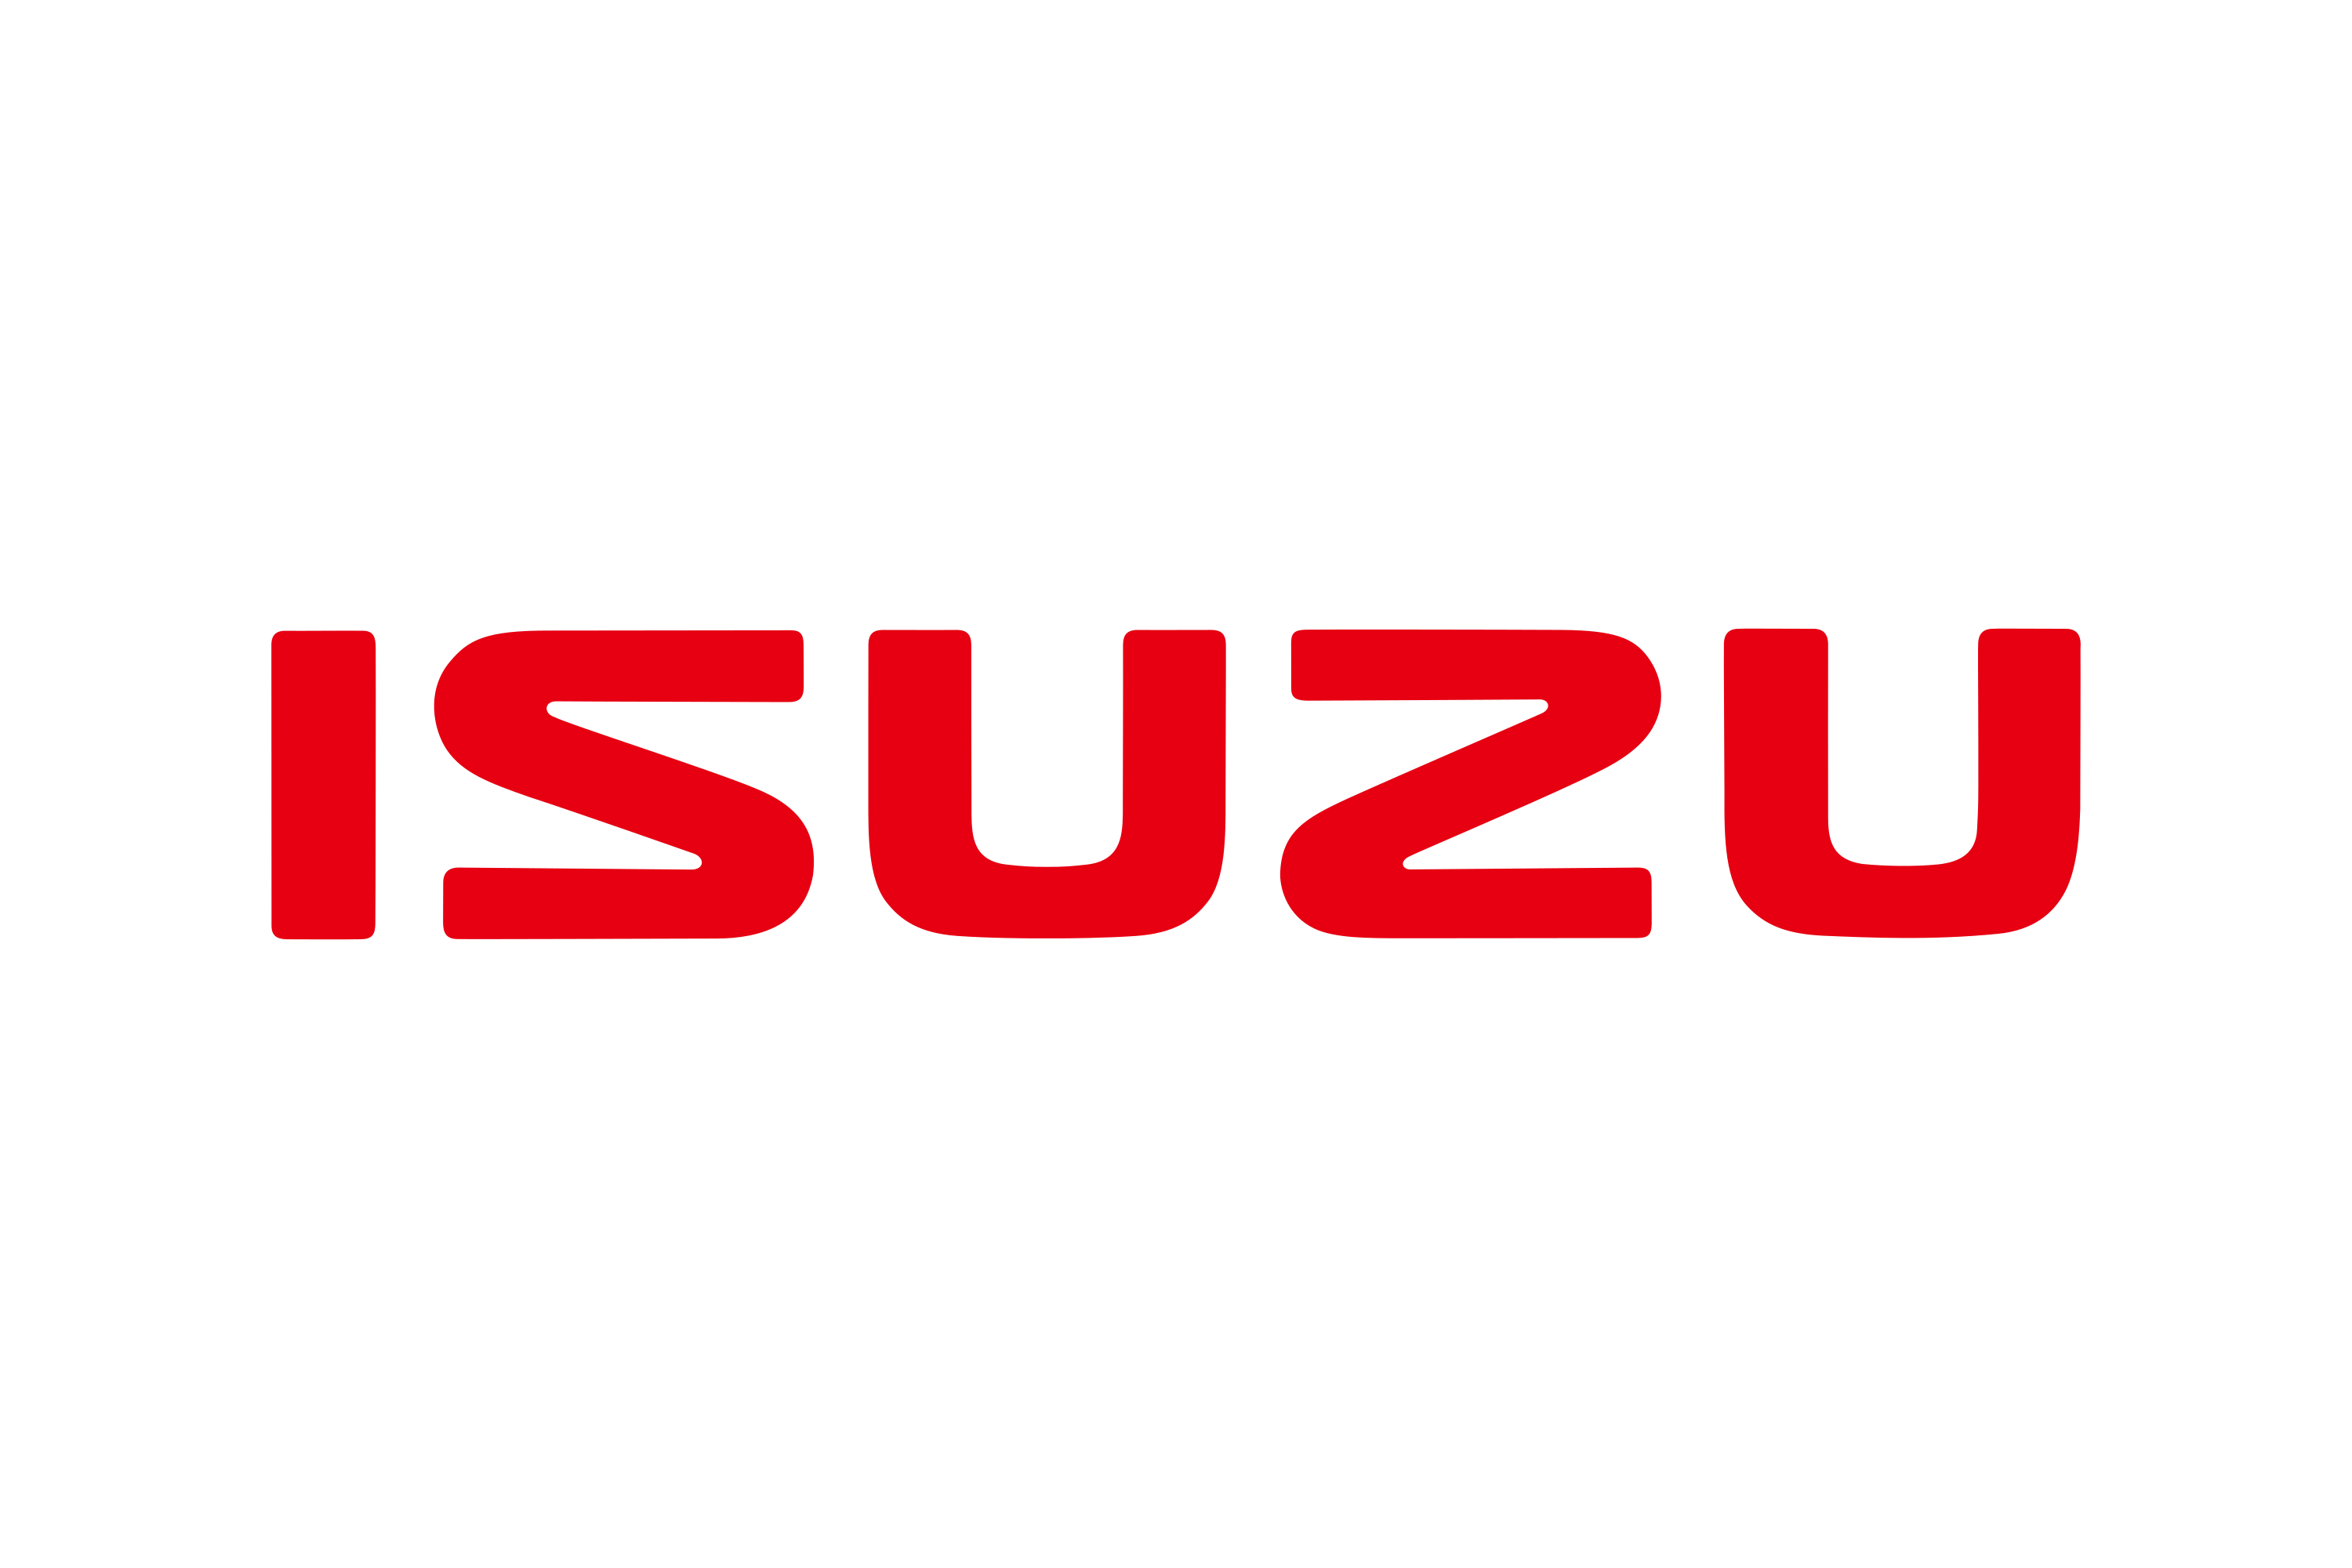 Download Isuzu Philippines Logo in SVG Vector or PNG File Format - Logo